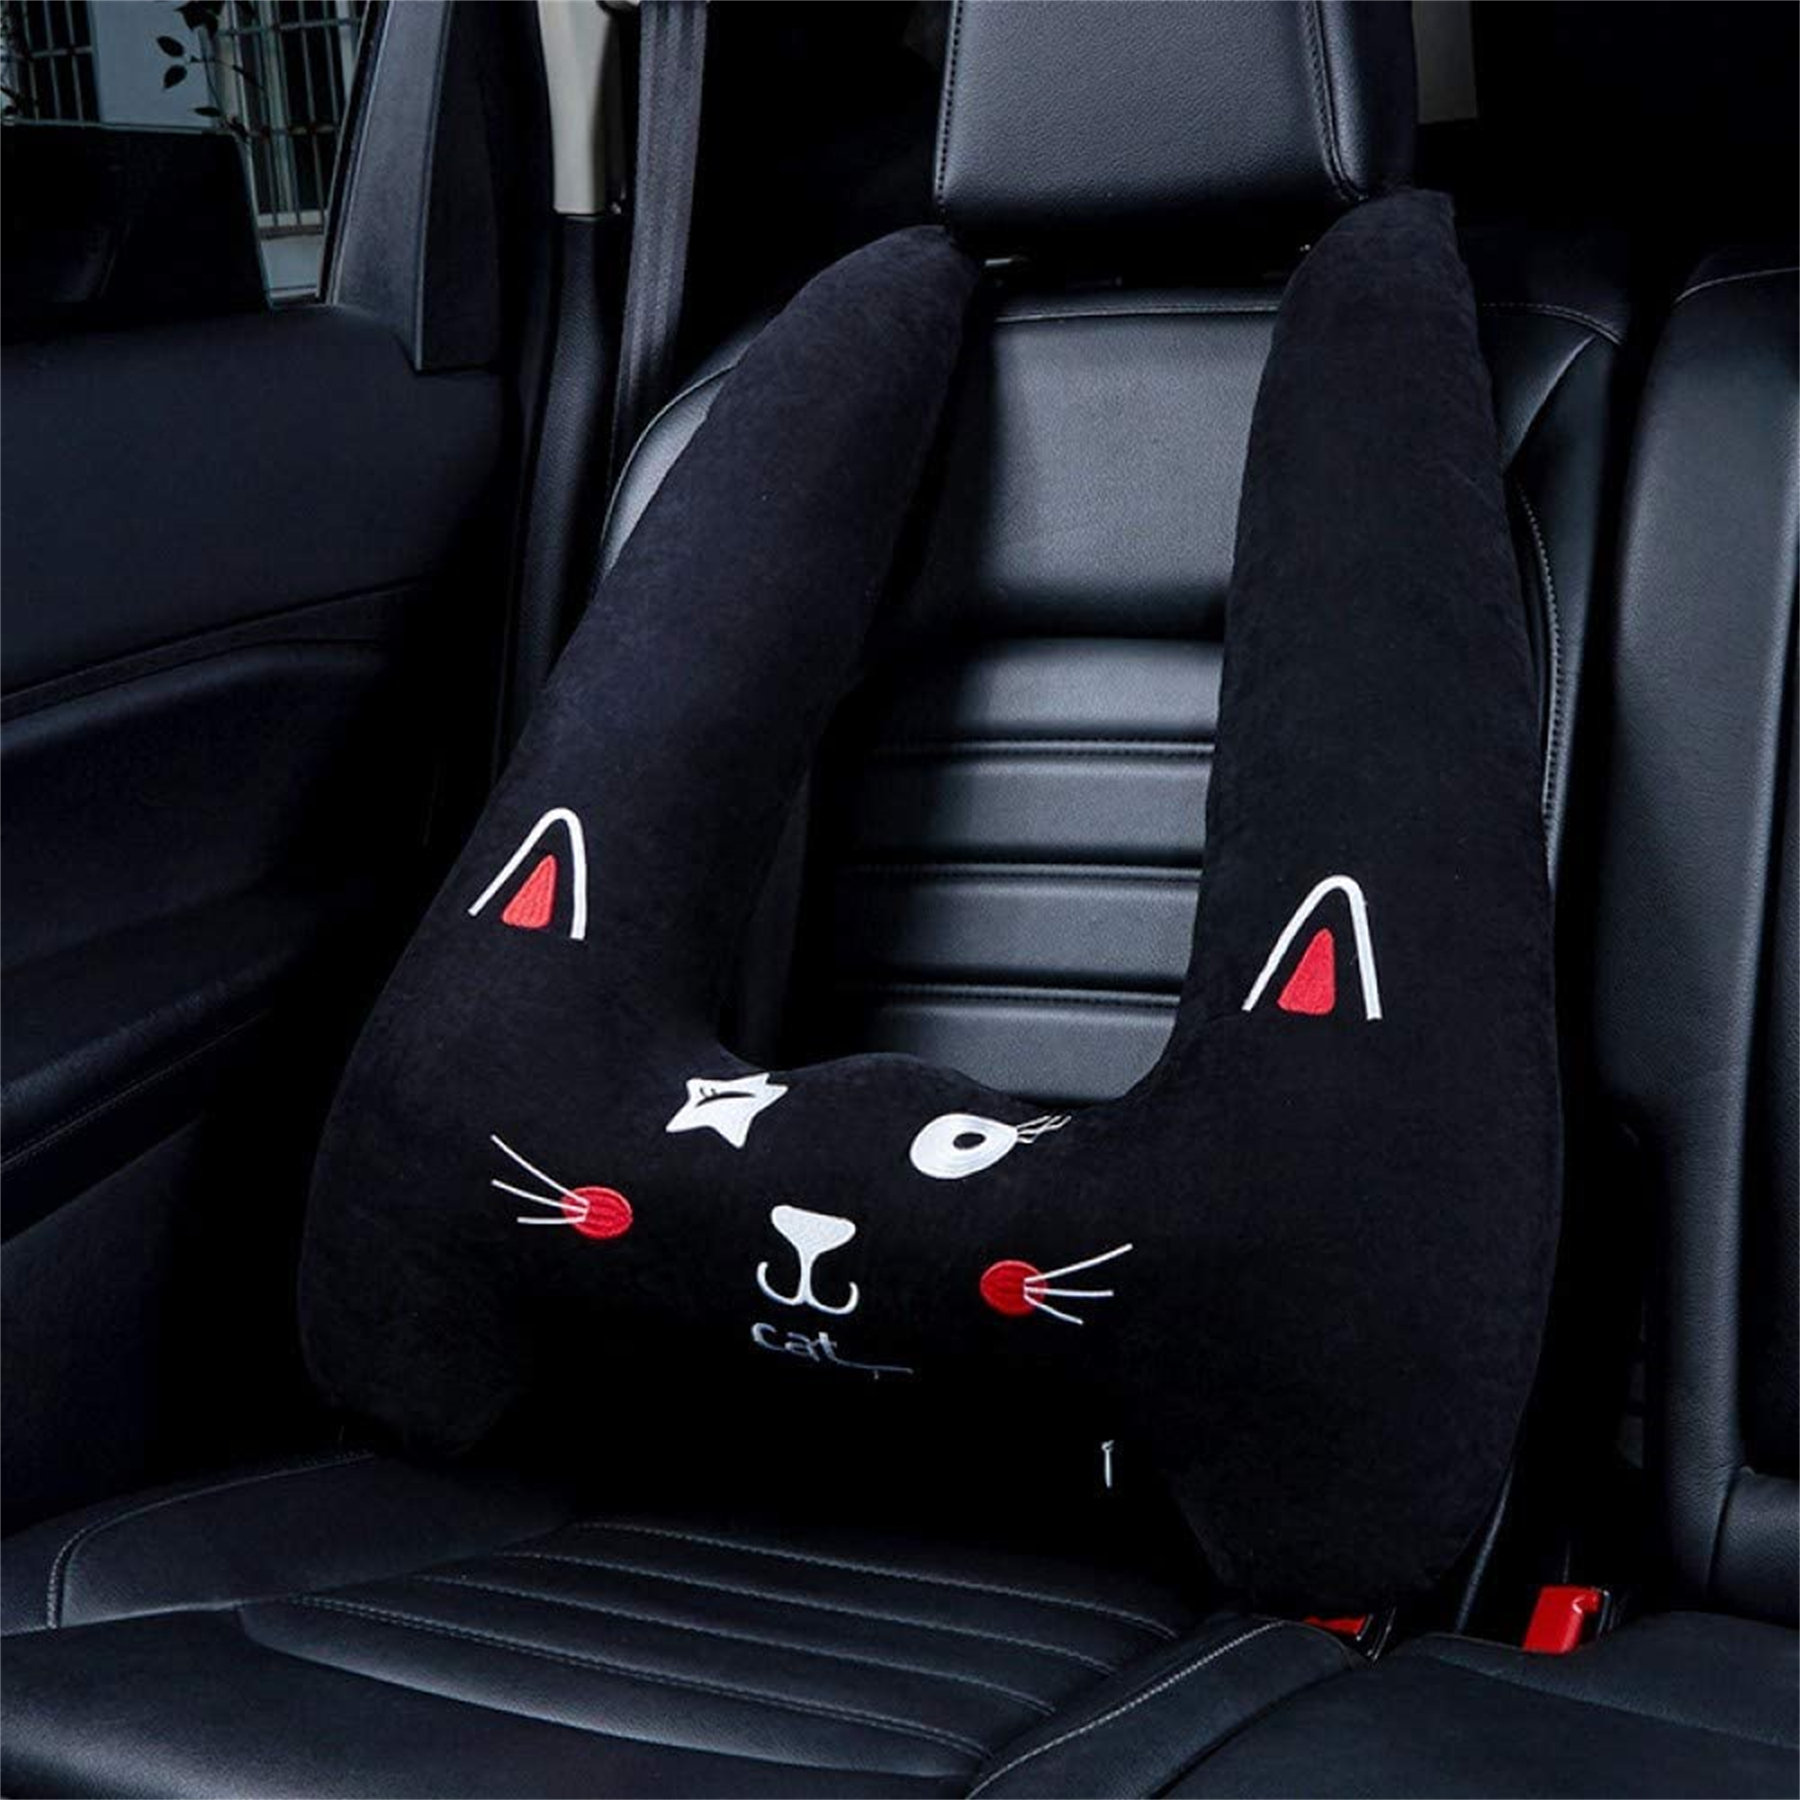 Squirrel U Shaped Travel Pillow Car Memory Neck Support Headrest Cushion S 